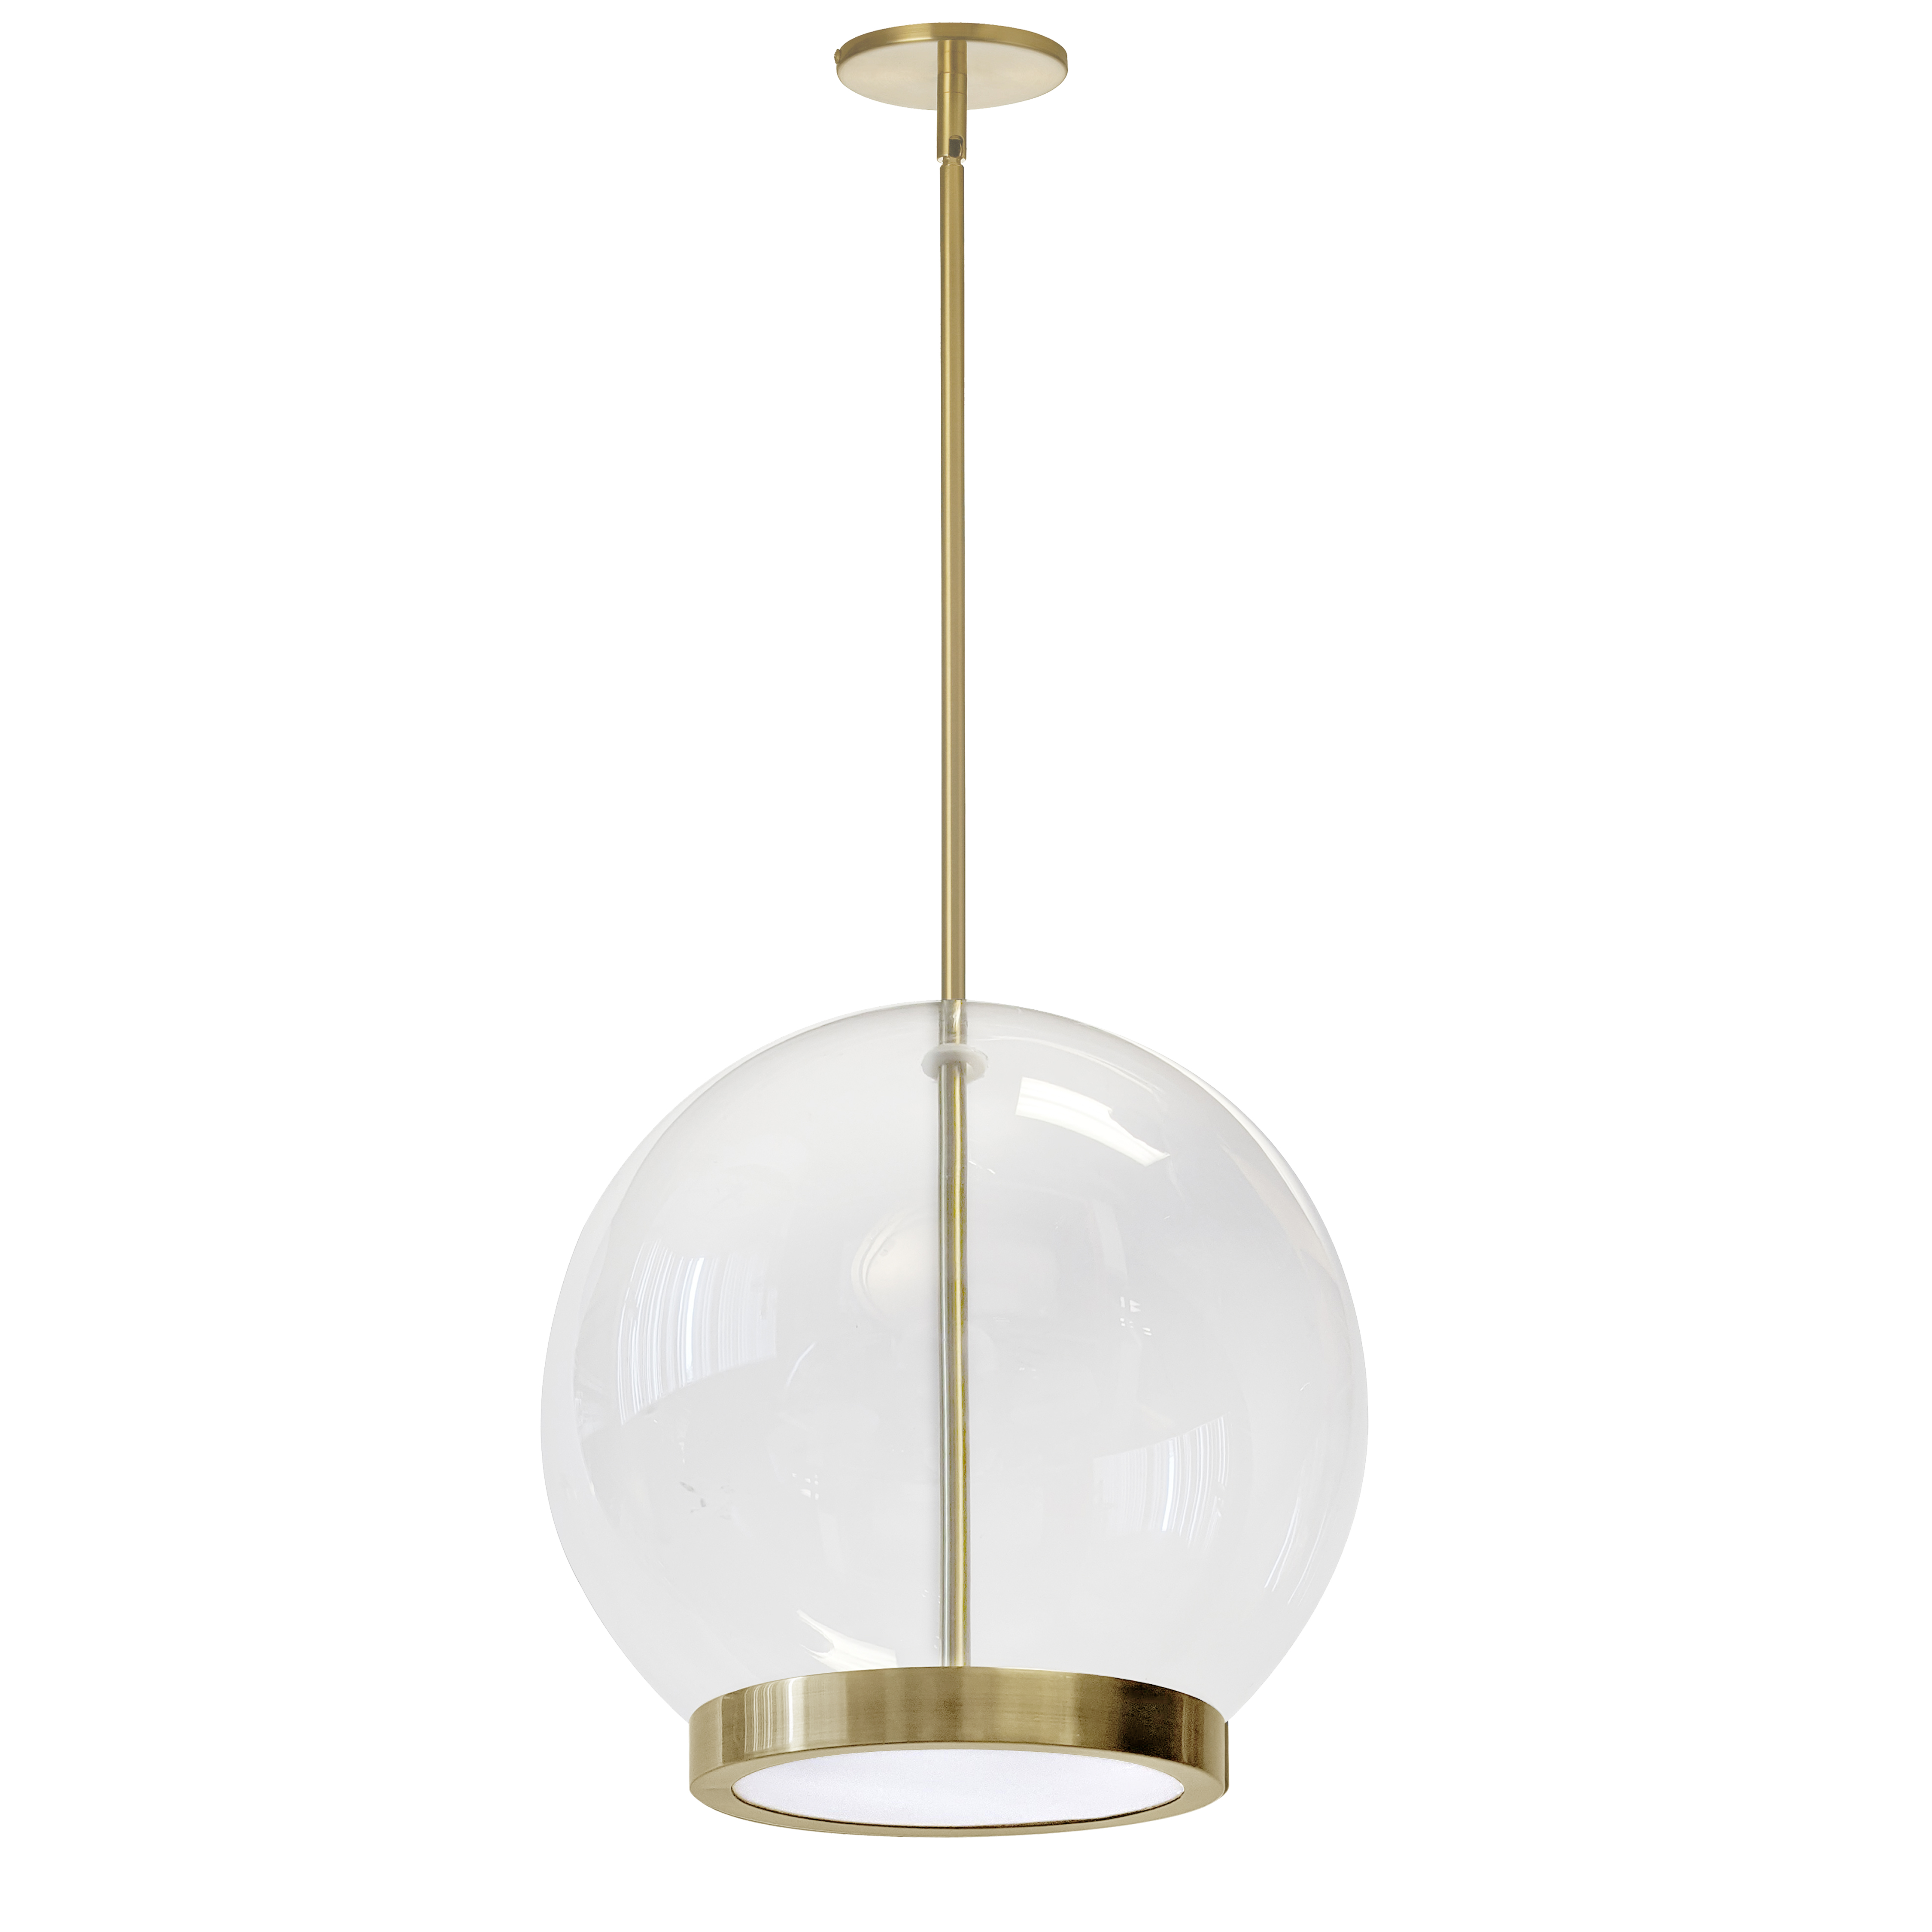 The Picotas family of lighting draws the eye upwards, and towards the furnishings around it, with its unique style. The design focuses on a large glass globe at its center. The metal frame in your choice of finish provides a contrast, holding the globe in a circular housing from below. It's a unique take on lighting that emphasizes the elegance of the sphere with a contemporary artistic edge.